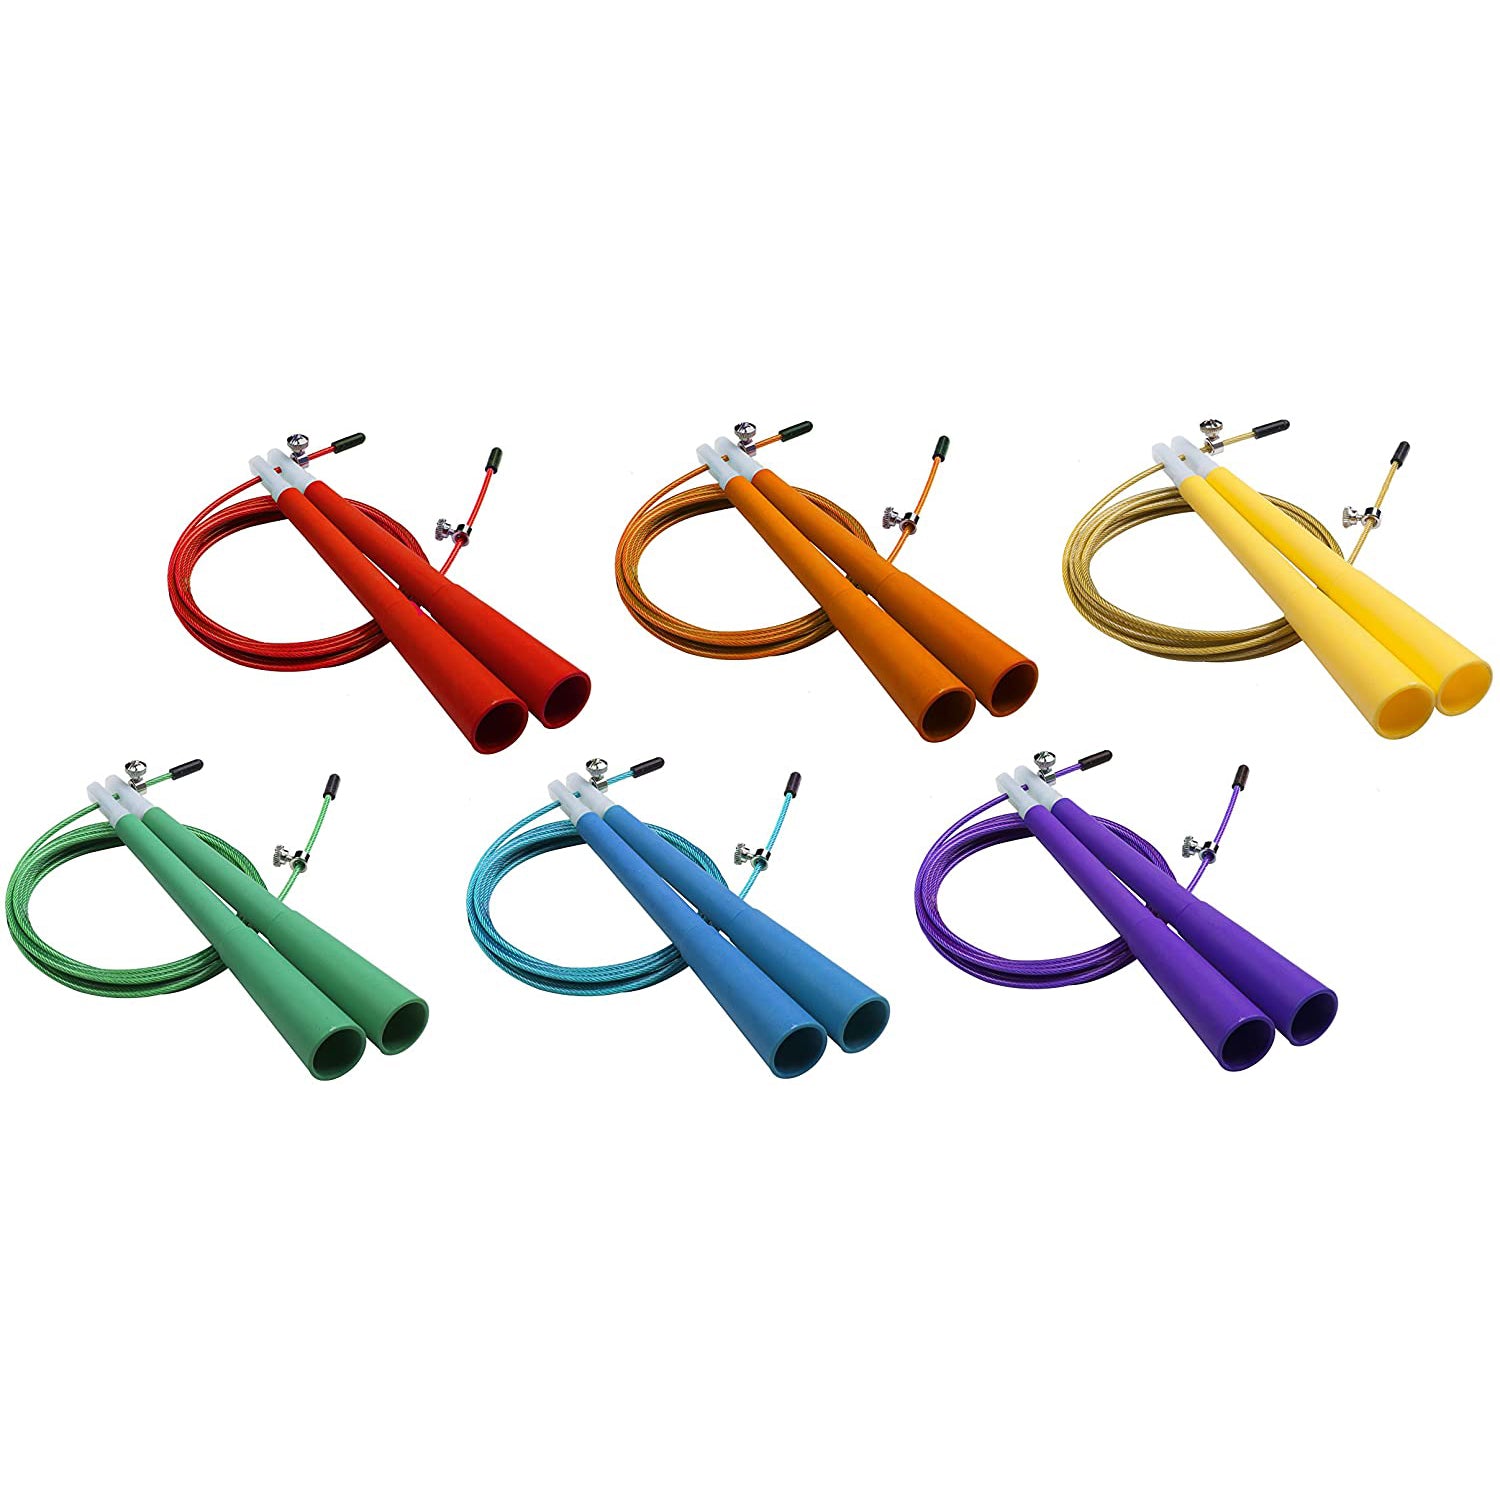 Double-Bearing Speed Jump Rope Set of 6 RHINO fitness indoor Jump Rope outdoor physical therapy